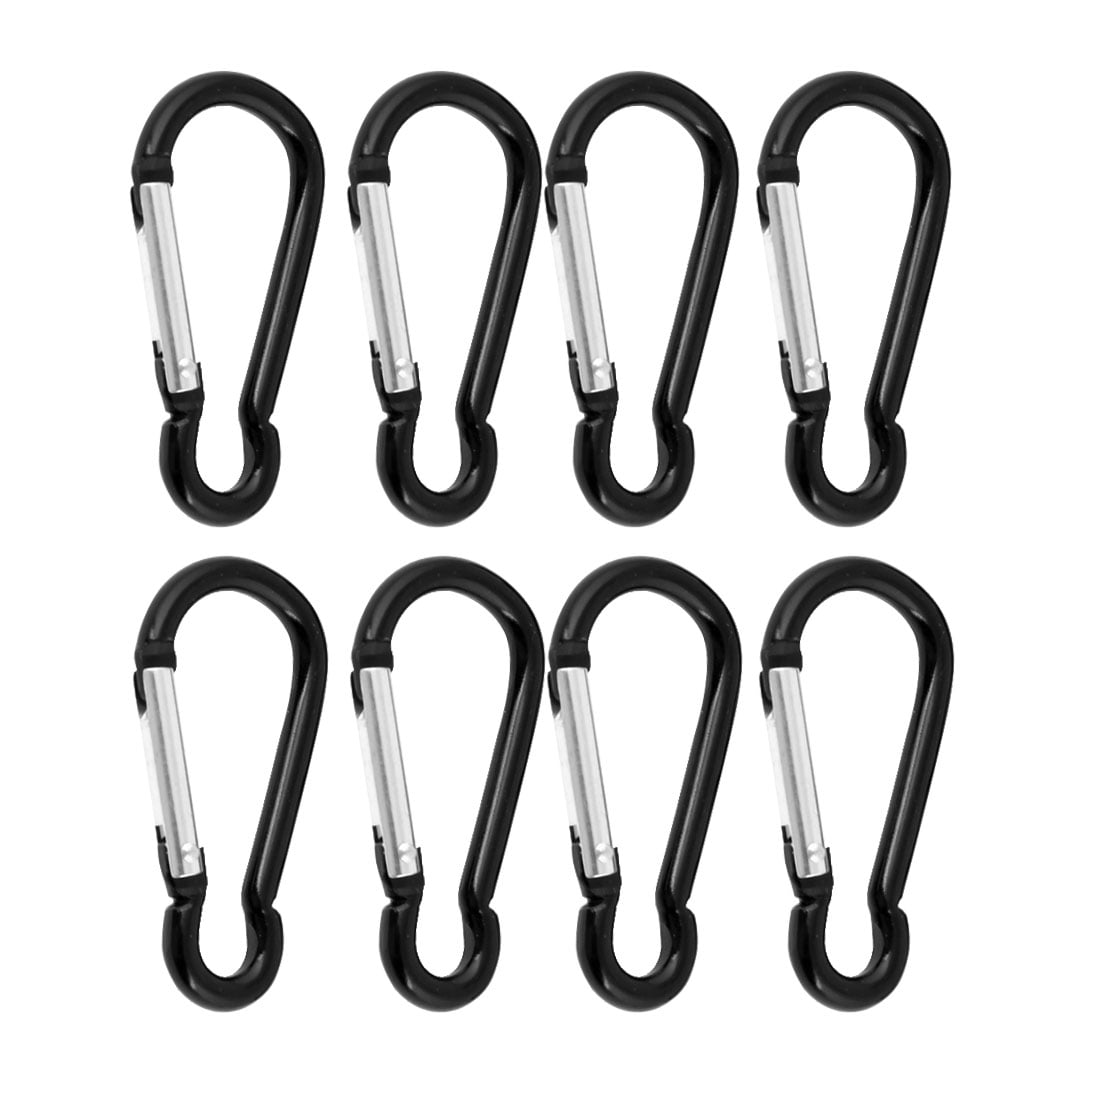 RA_ 10Pcs Black Carabiner Camp Clip Hook for Outdoor Hiking Climbing Traveling 